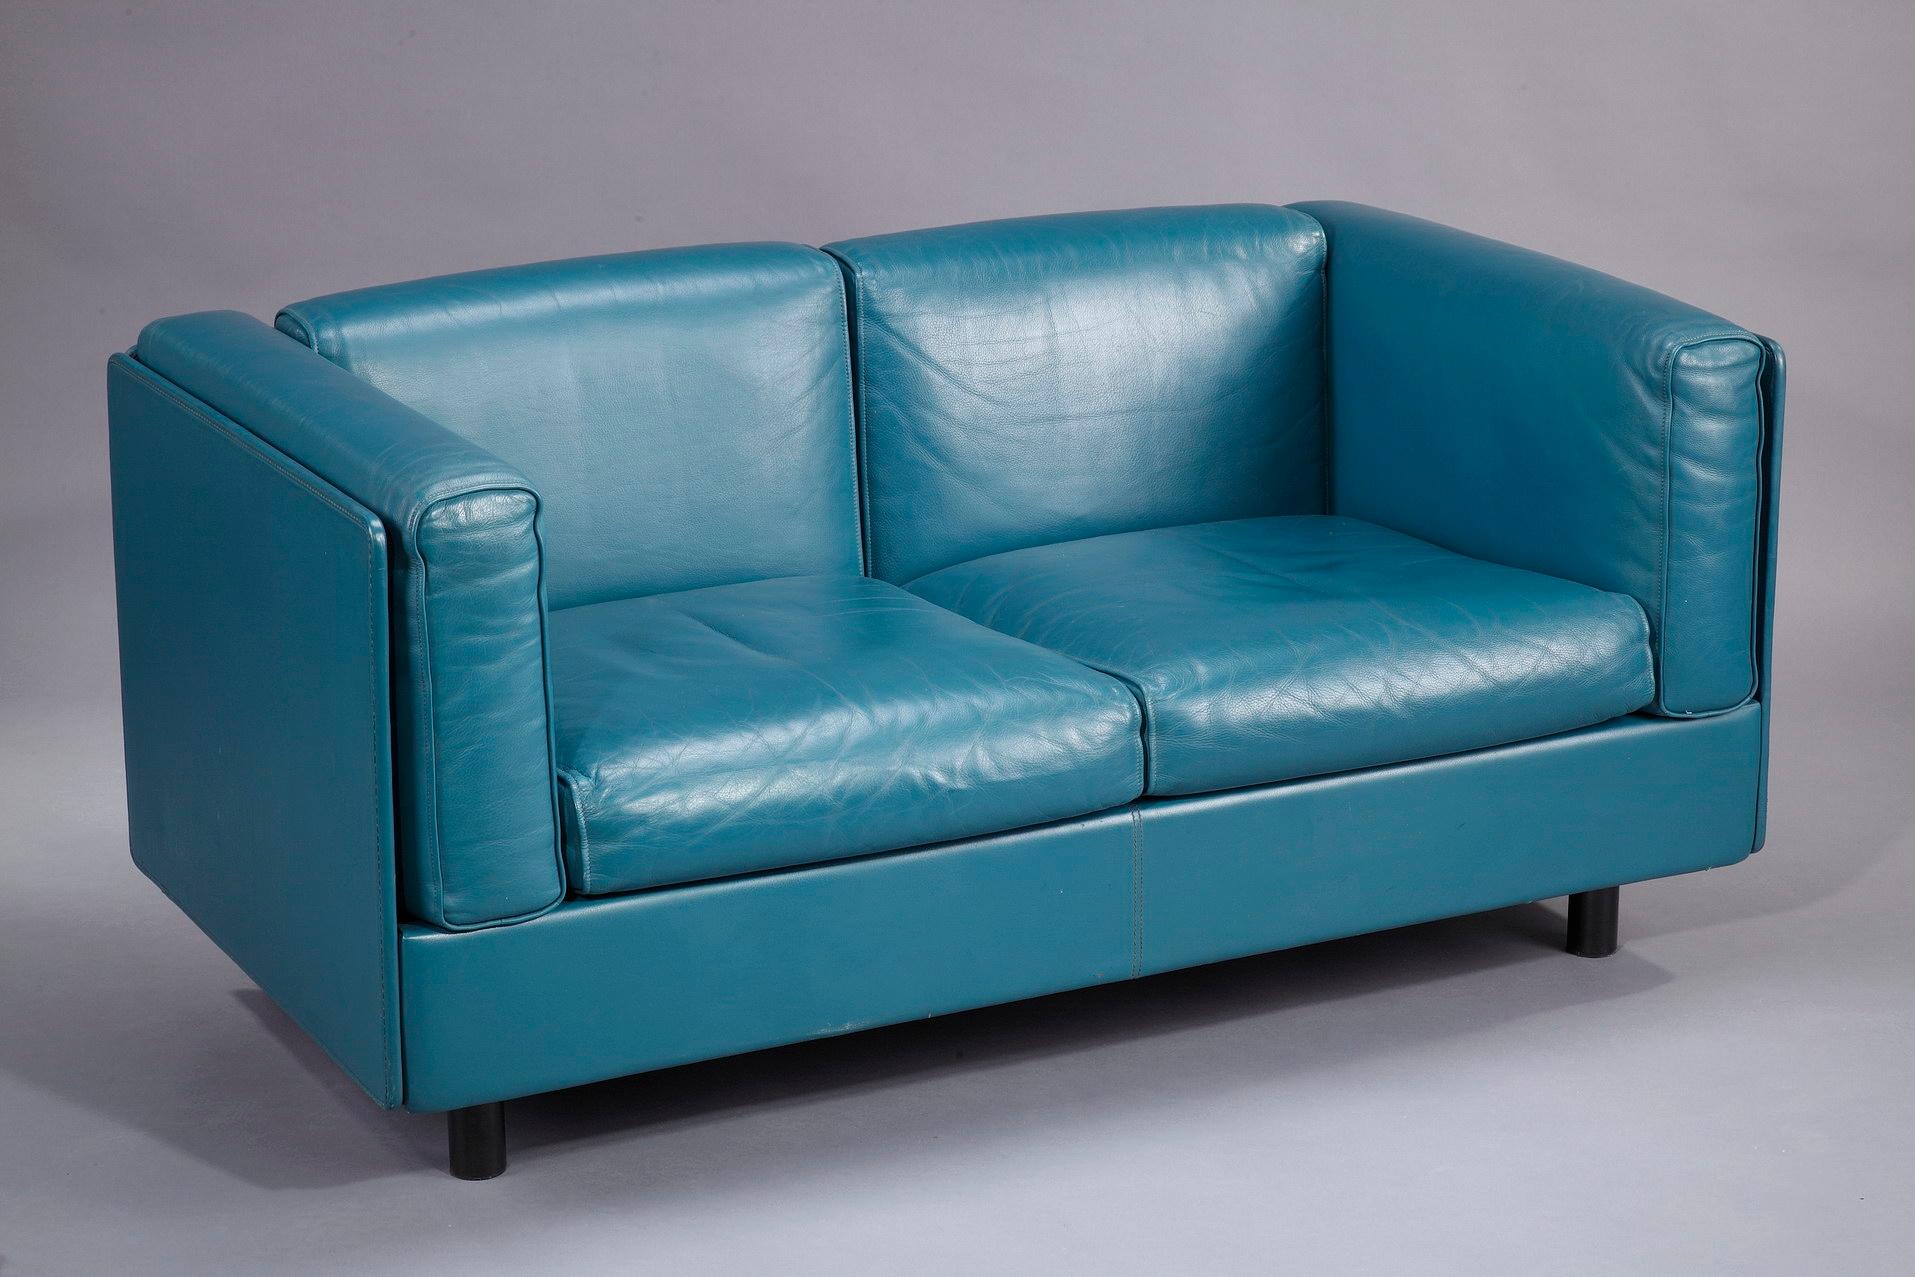 Zanotta monobloc sofa, entirely covered with full grain blue leather, resting on four black lacquered metal legs. The seat is composed of six independent cushions. Removable cushions and removable cover in leather. This vintage sofa was manufactured